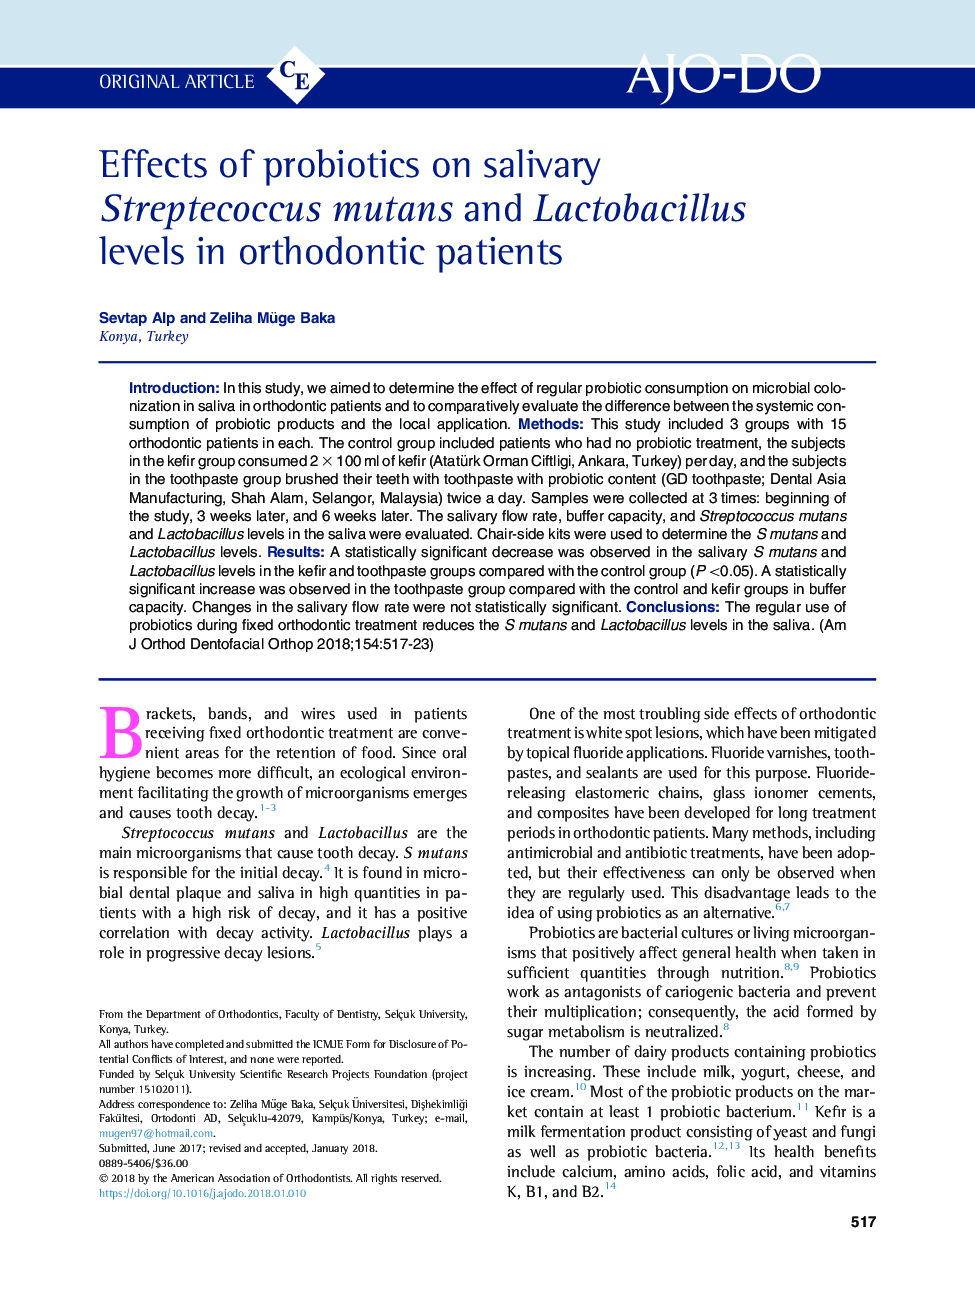 Effects of probiotics on salivary Streptecoccus mutans and Lactobacillus levels in orthodontic patients